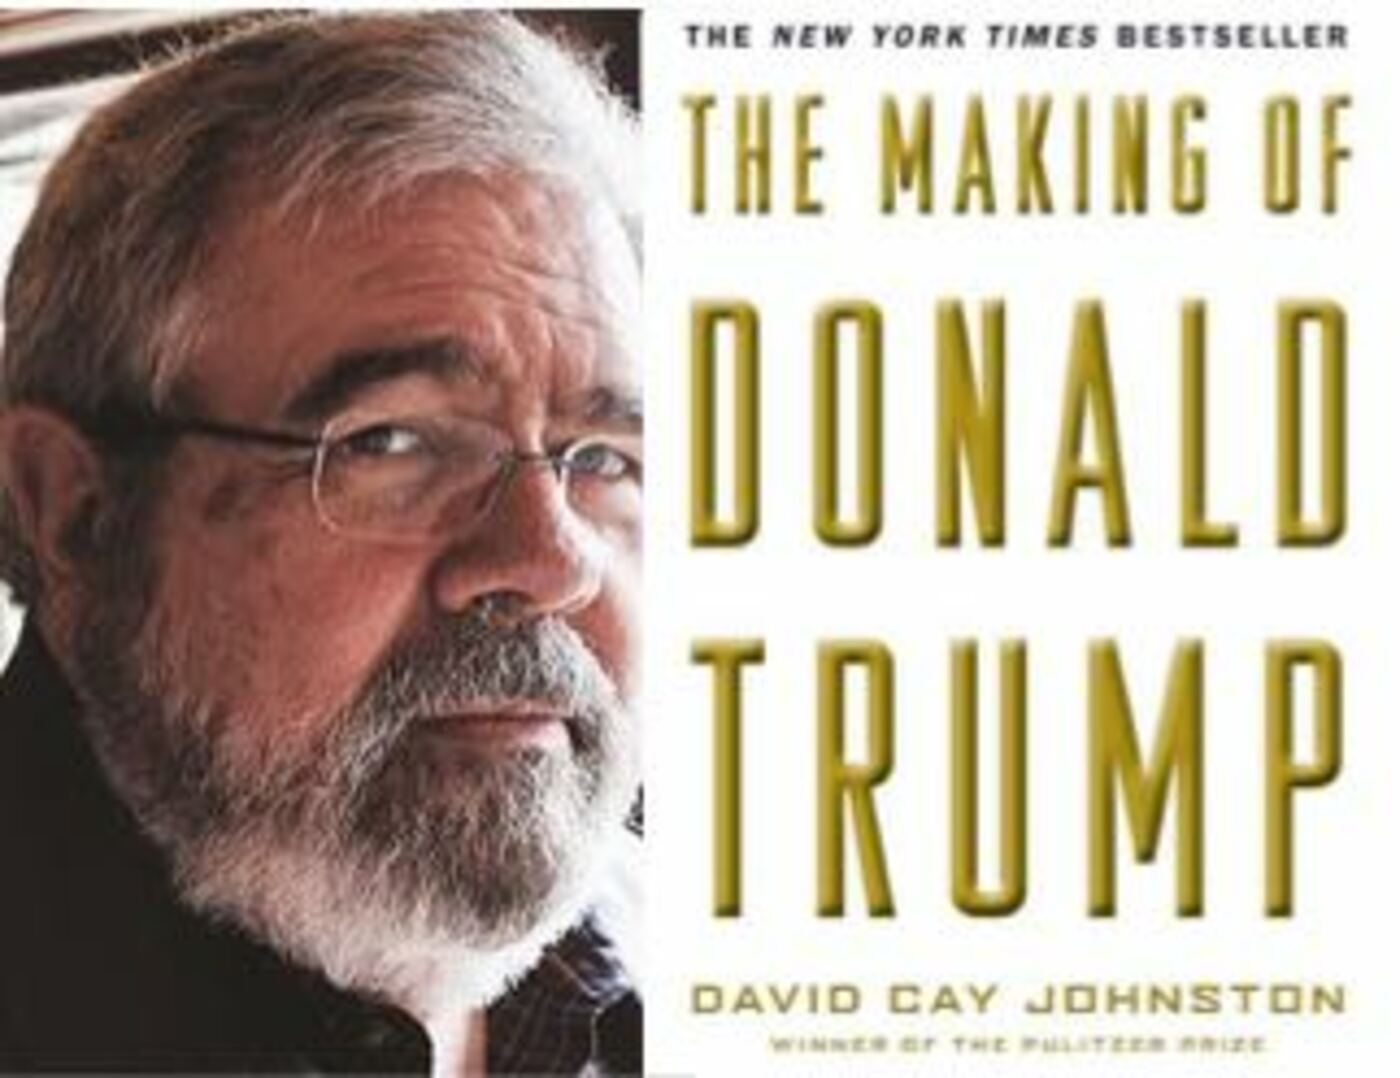 What’s Trump hiding? 2017 interview w DAVID CAY JOHNSTON, The Making of Donald Trump